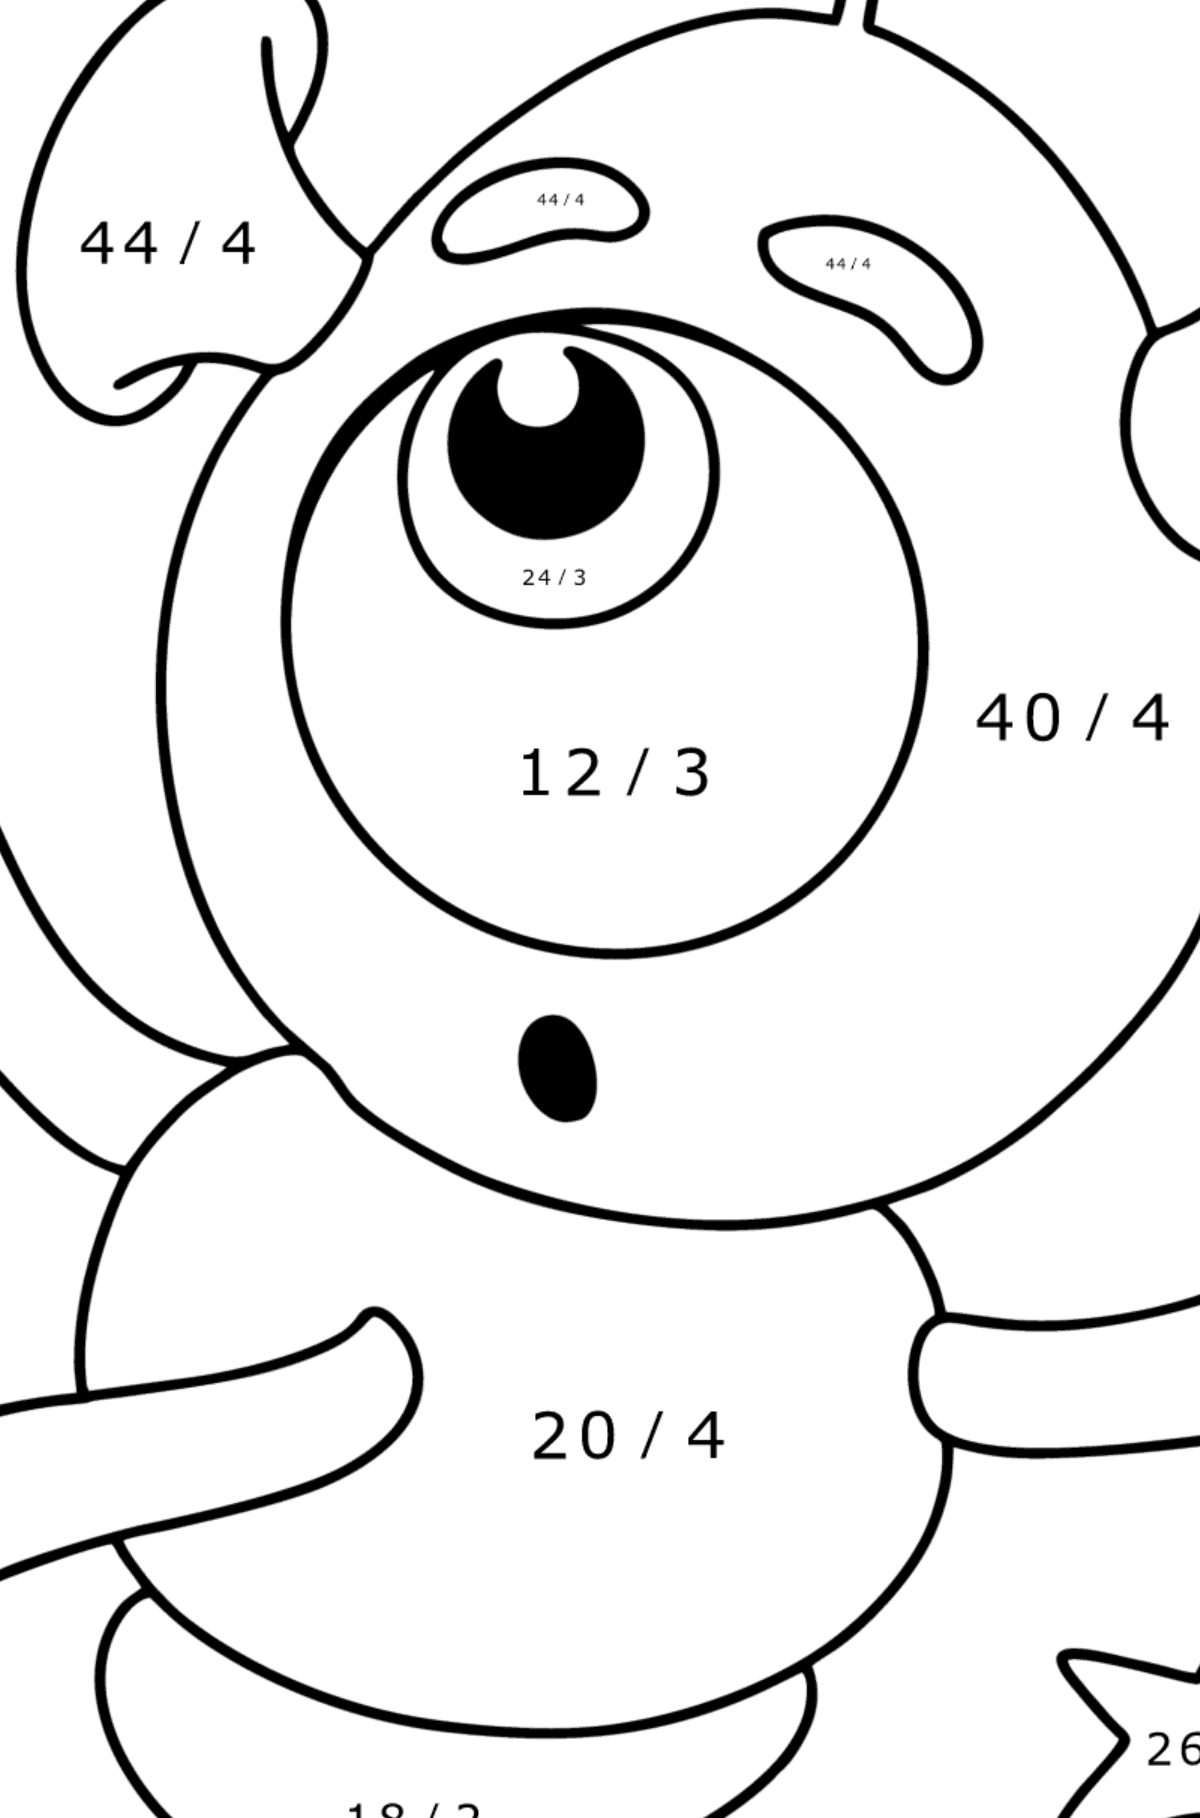 Little Alien Coloring page - Math Coloring - Division for Kids